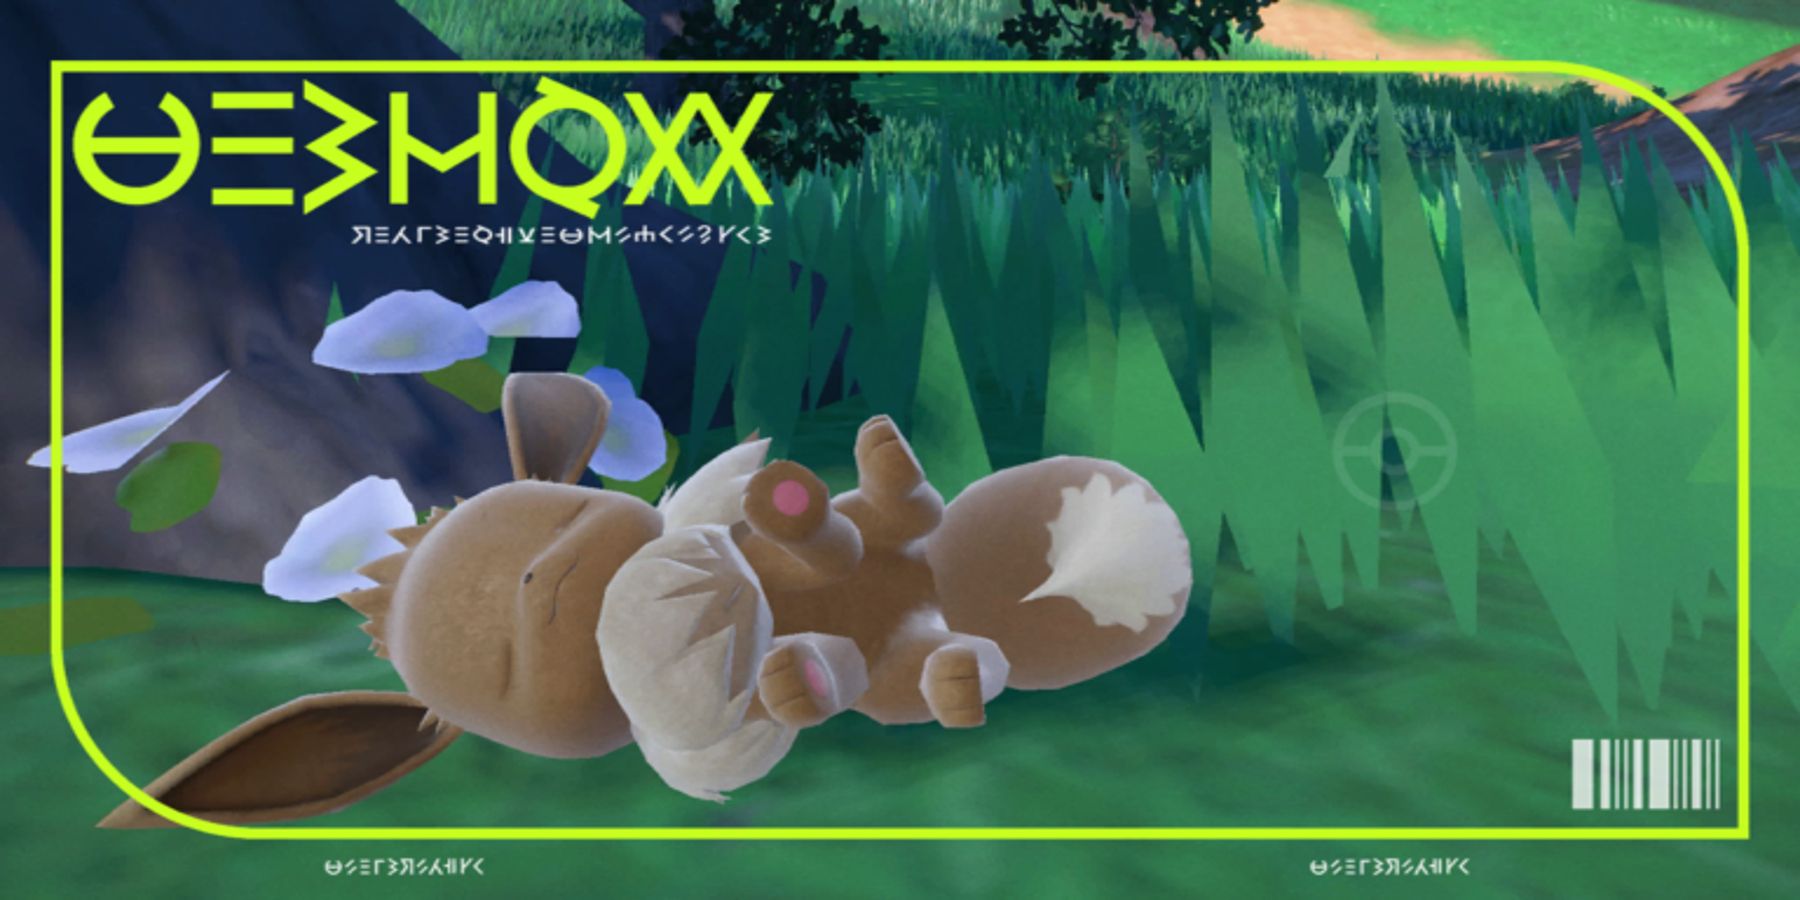 Eevee lies in the grass in its Pokedex entry.